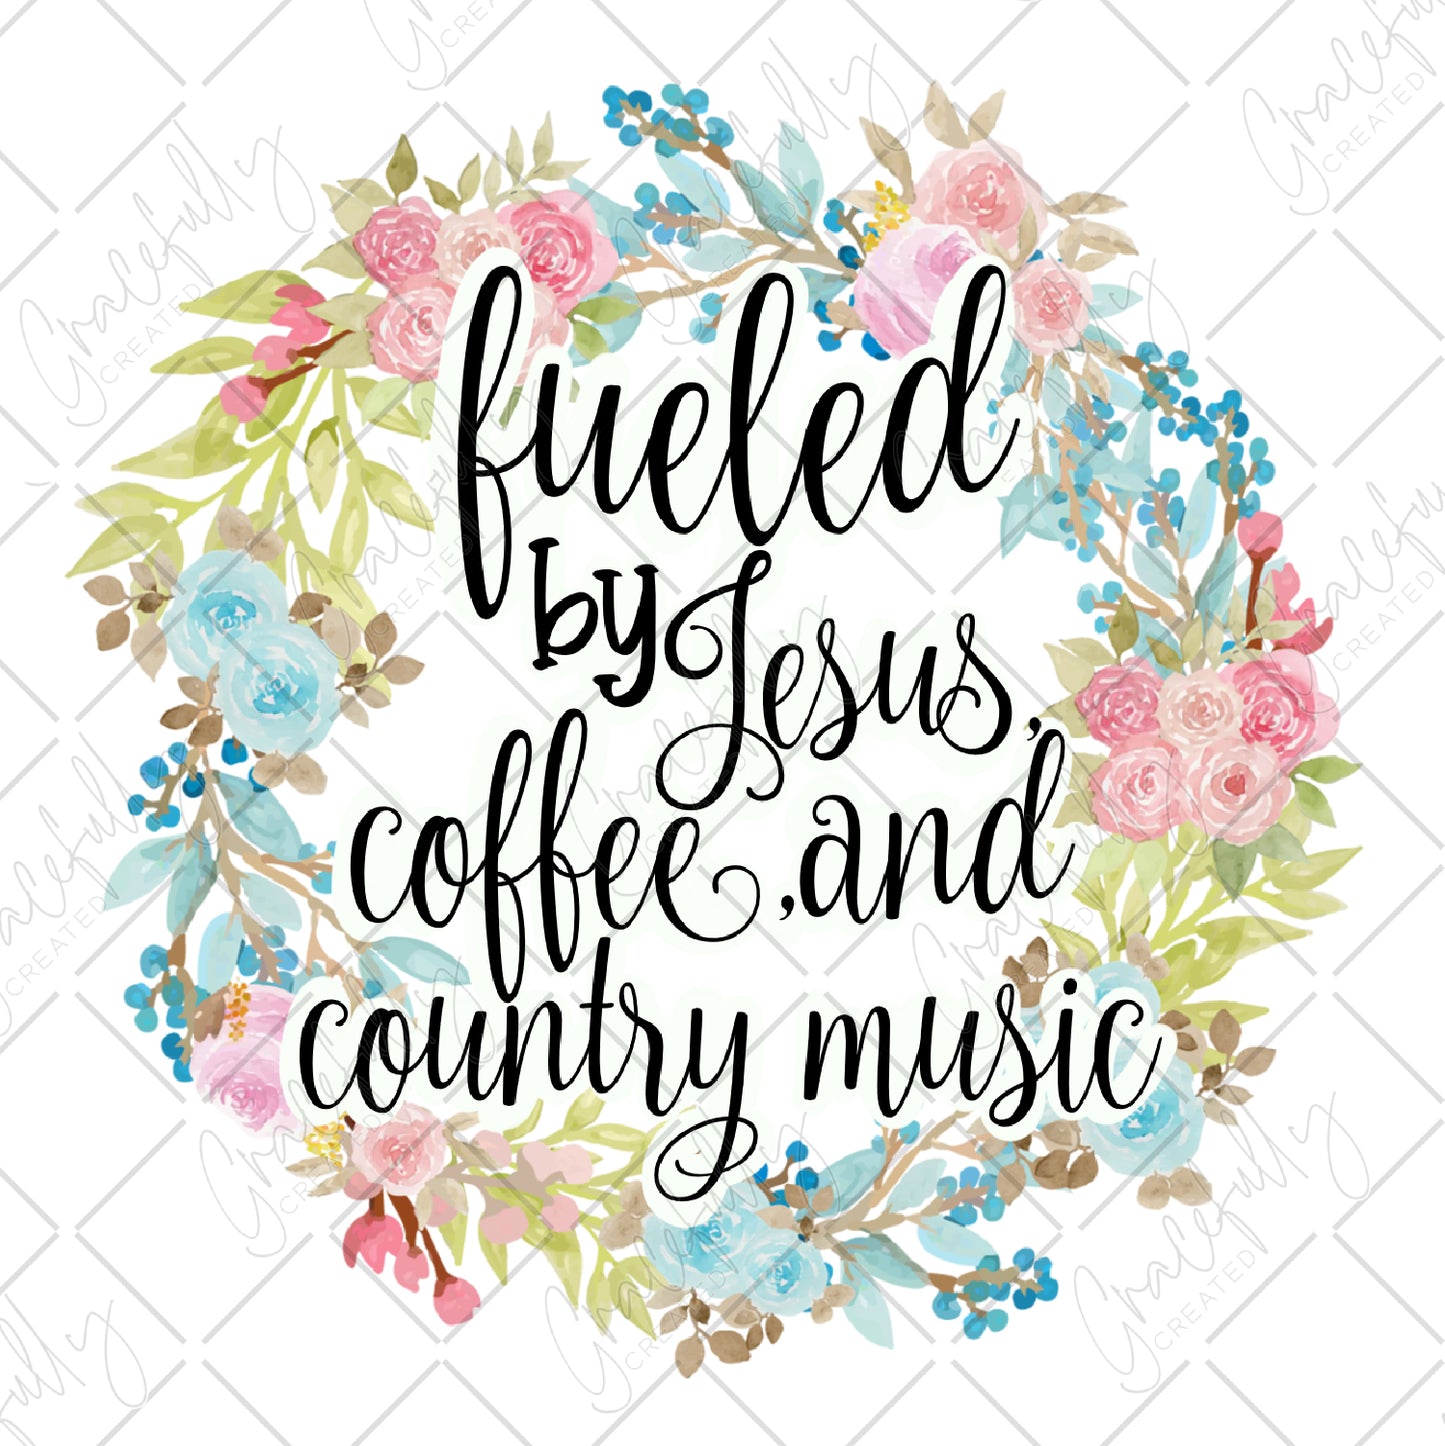 R24 Fueled By Jesus, Coffee, and Country Music